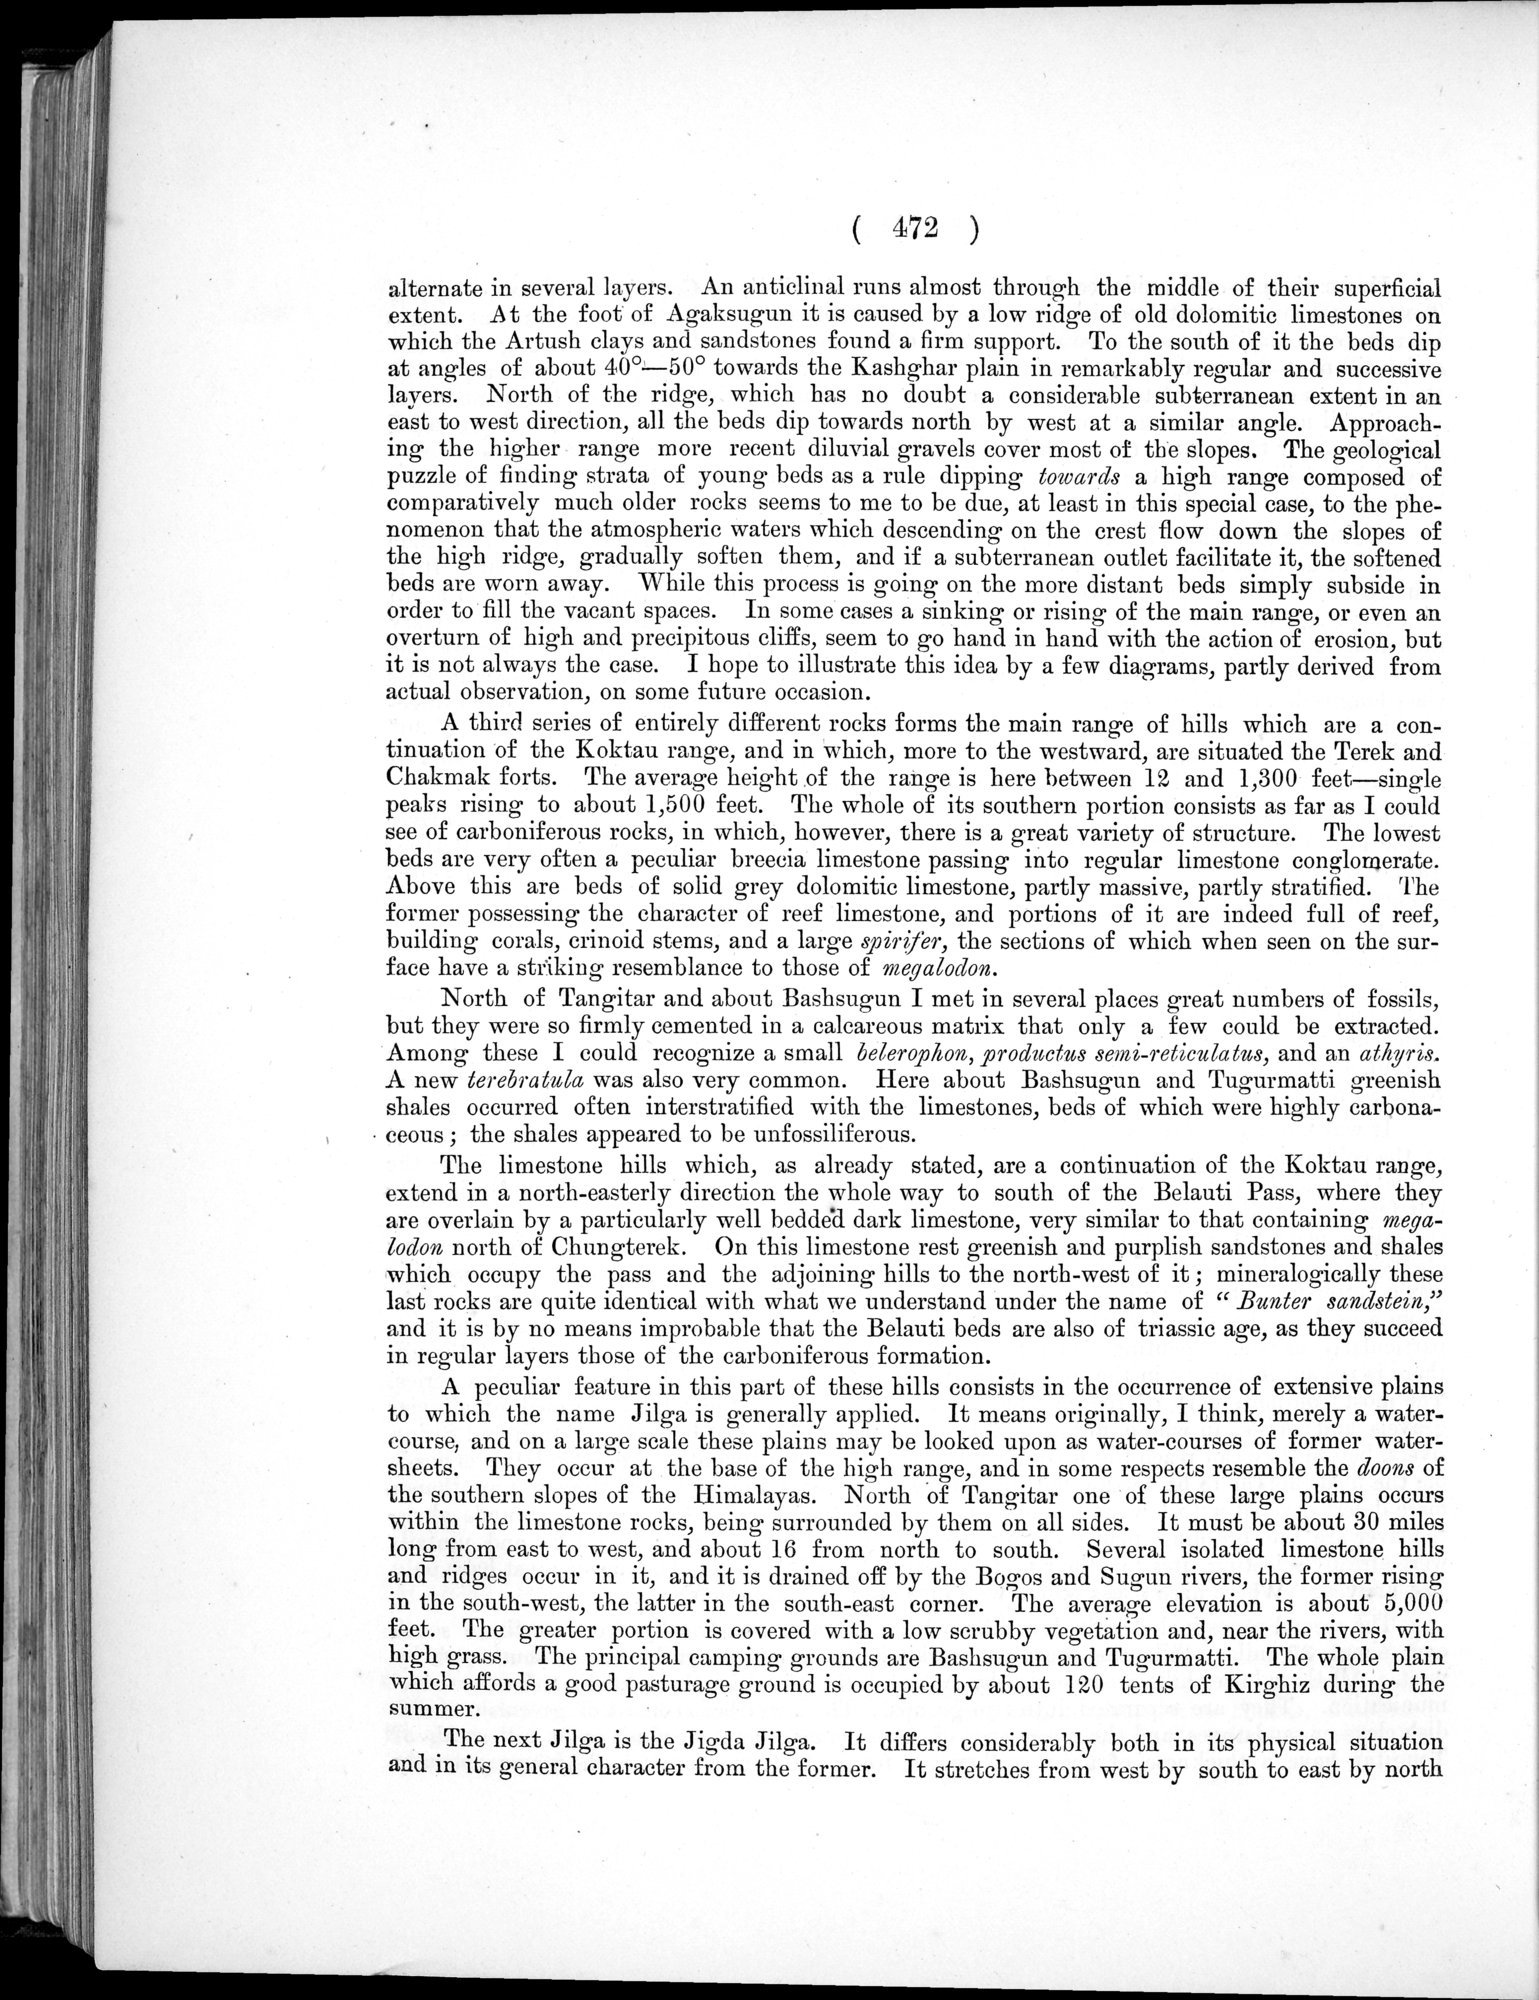 Report of a Mission to Yarkund in 1873 : vol.1 / Page 606 (Grayscale High Resolution Image)